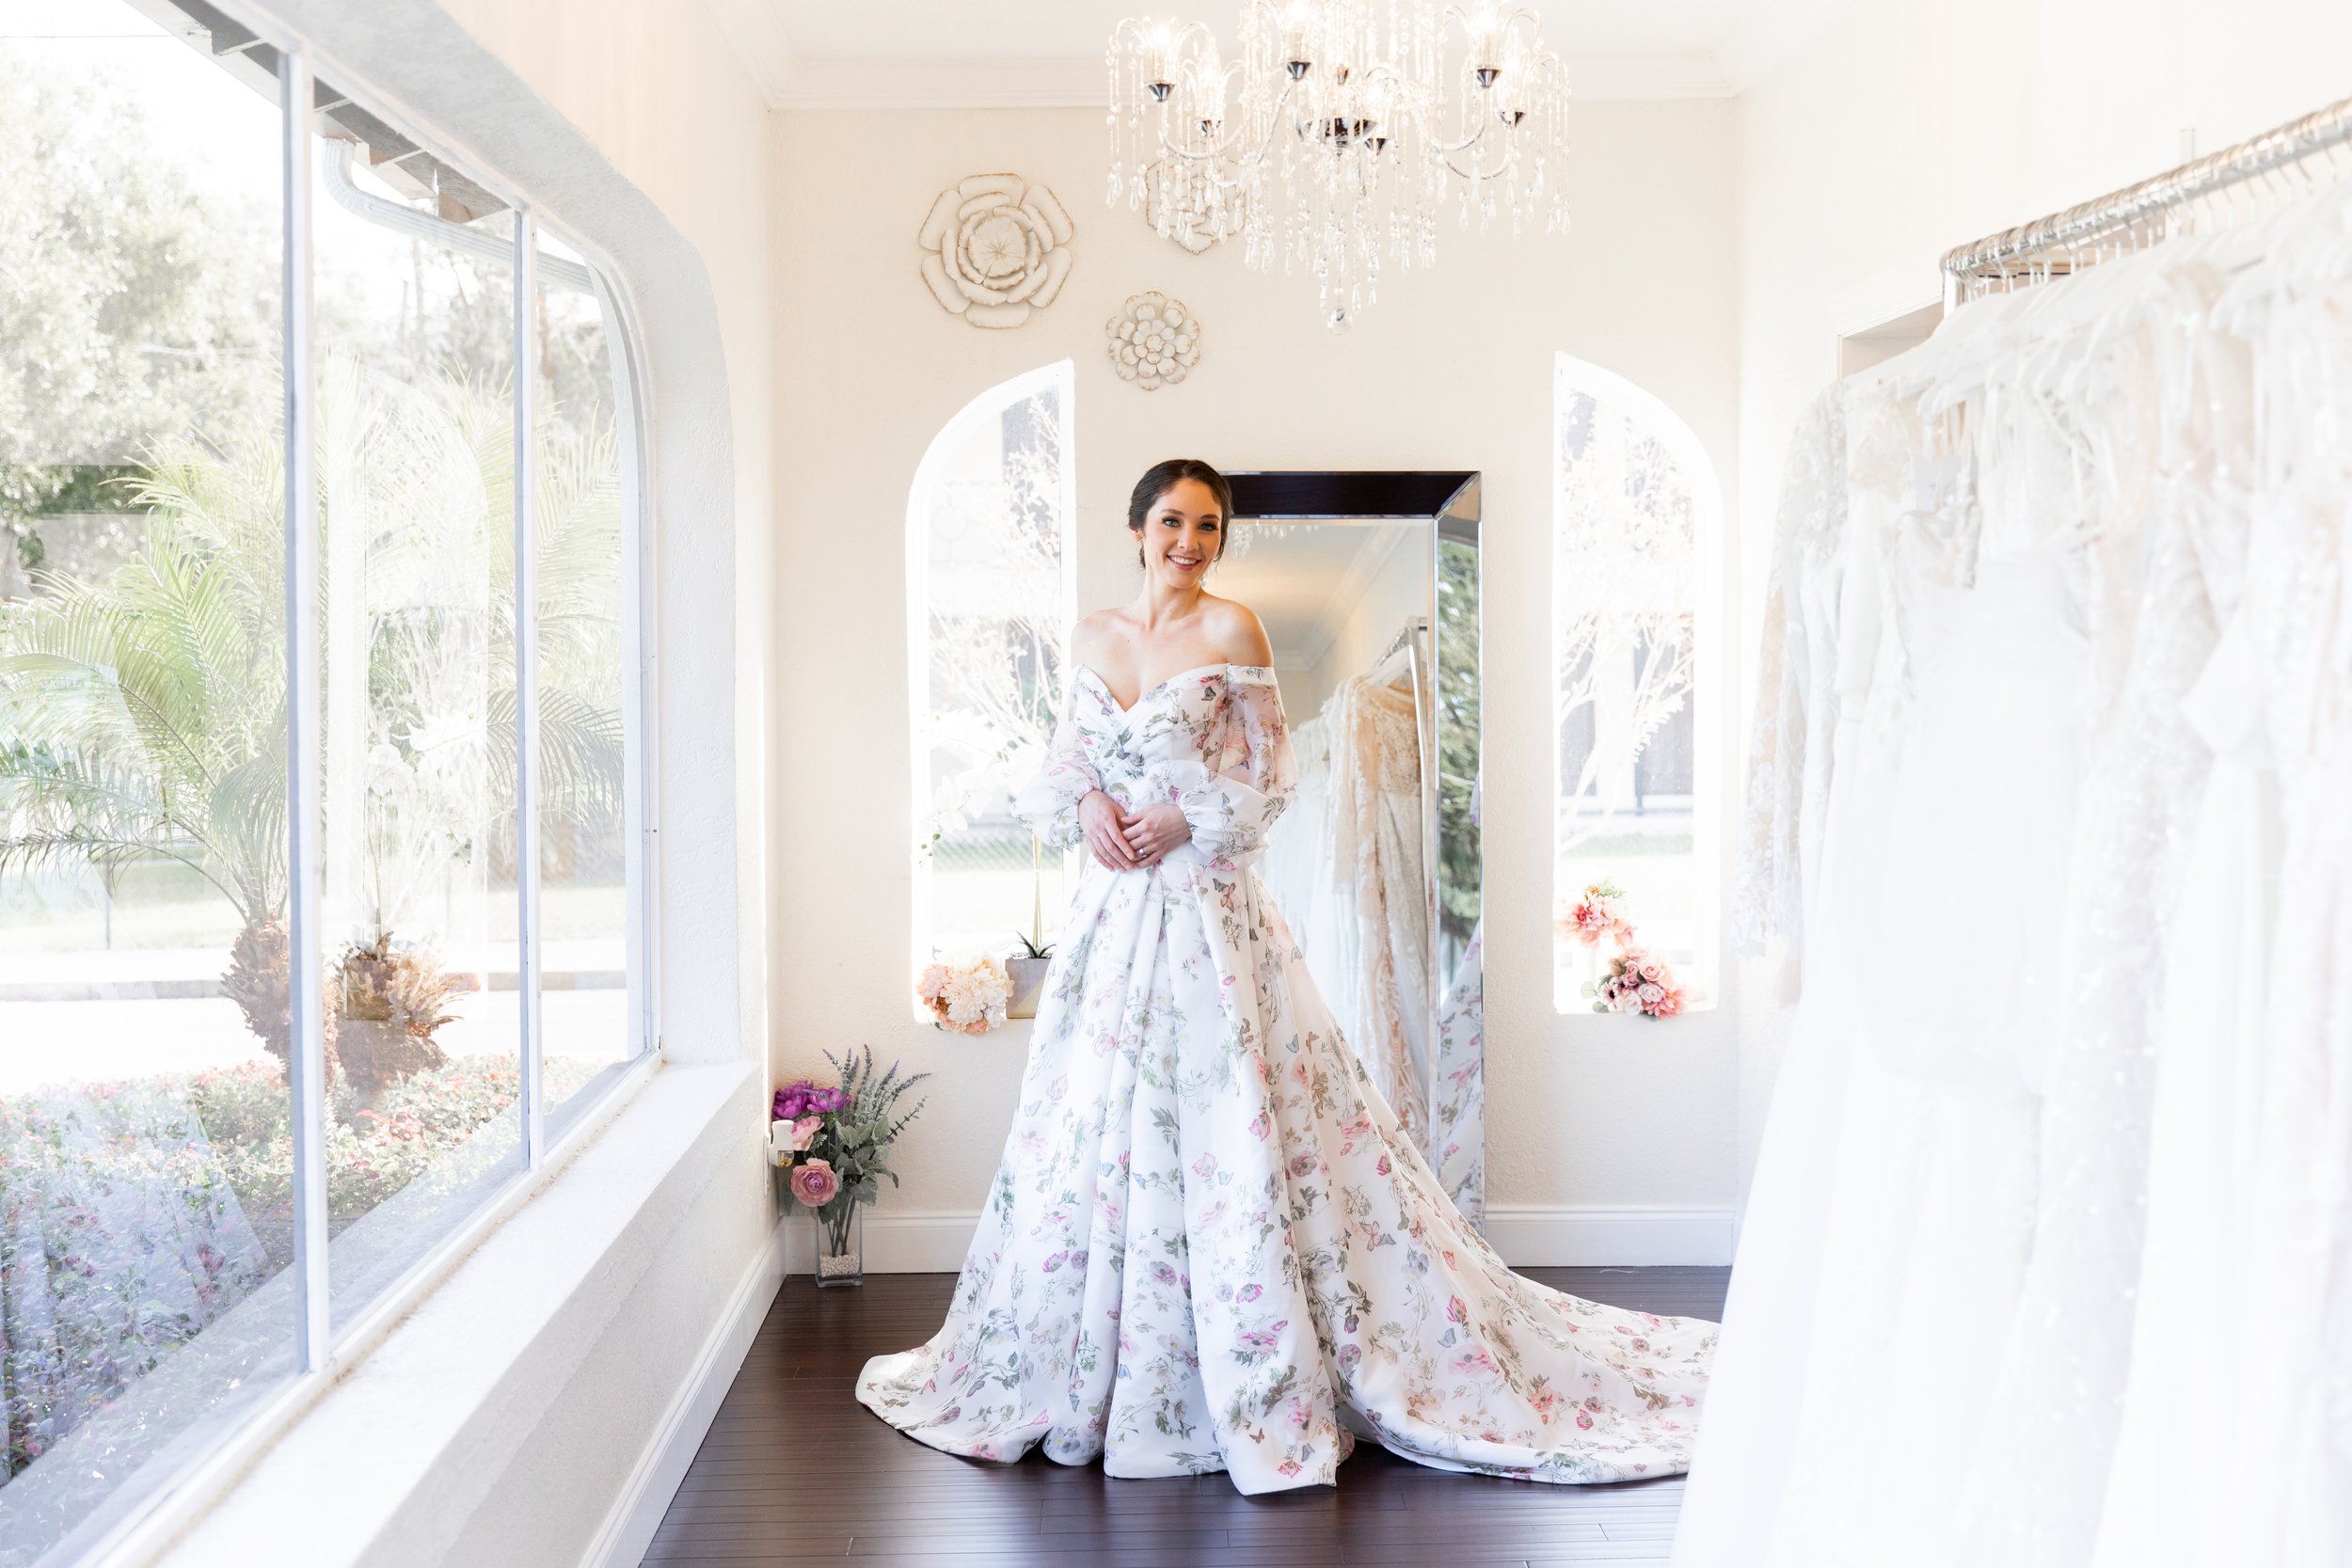 Bridal Collective to unveil all brands in Chicago